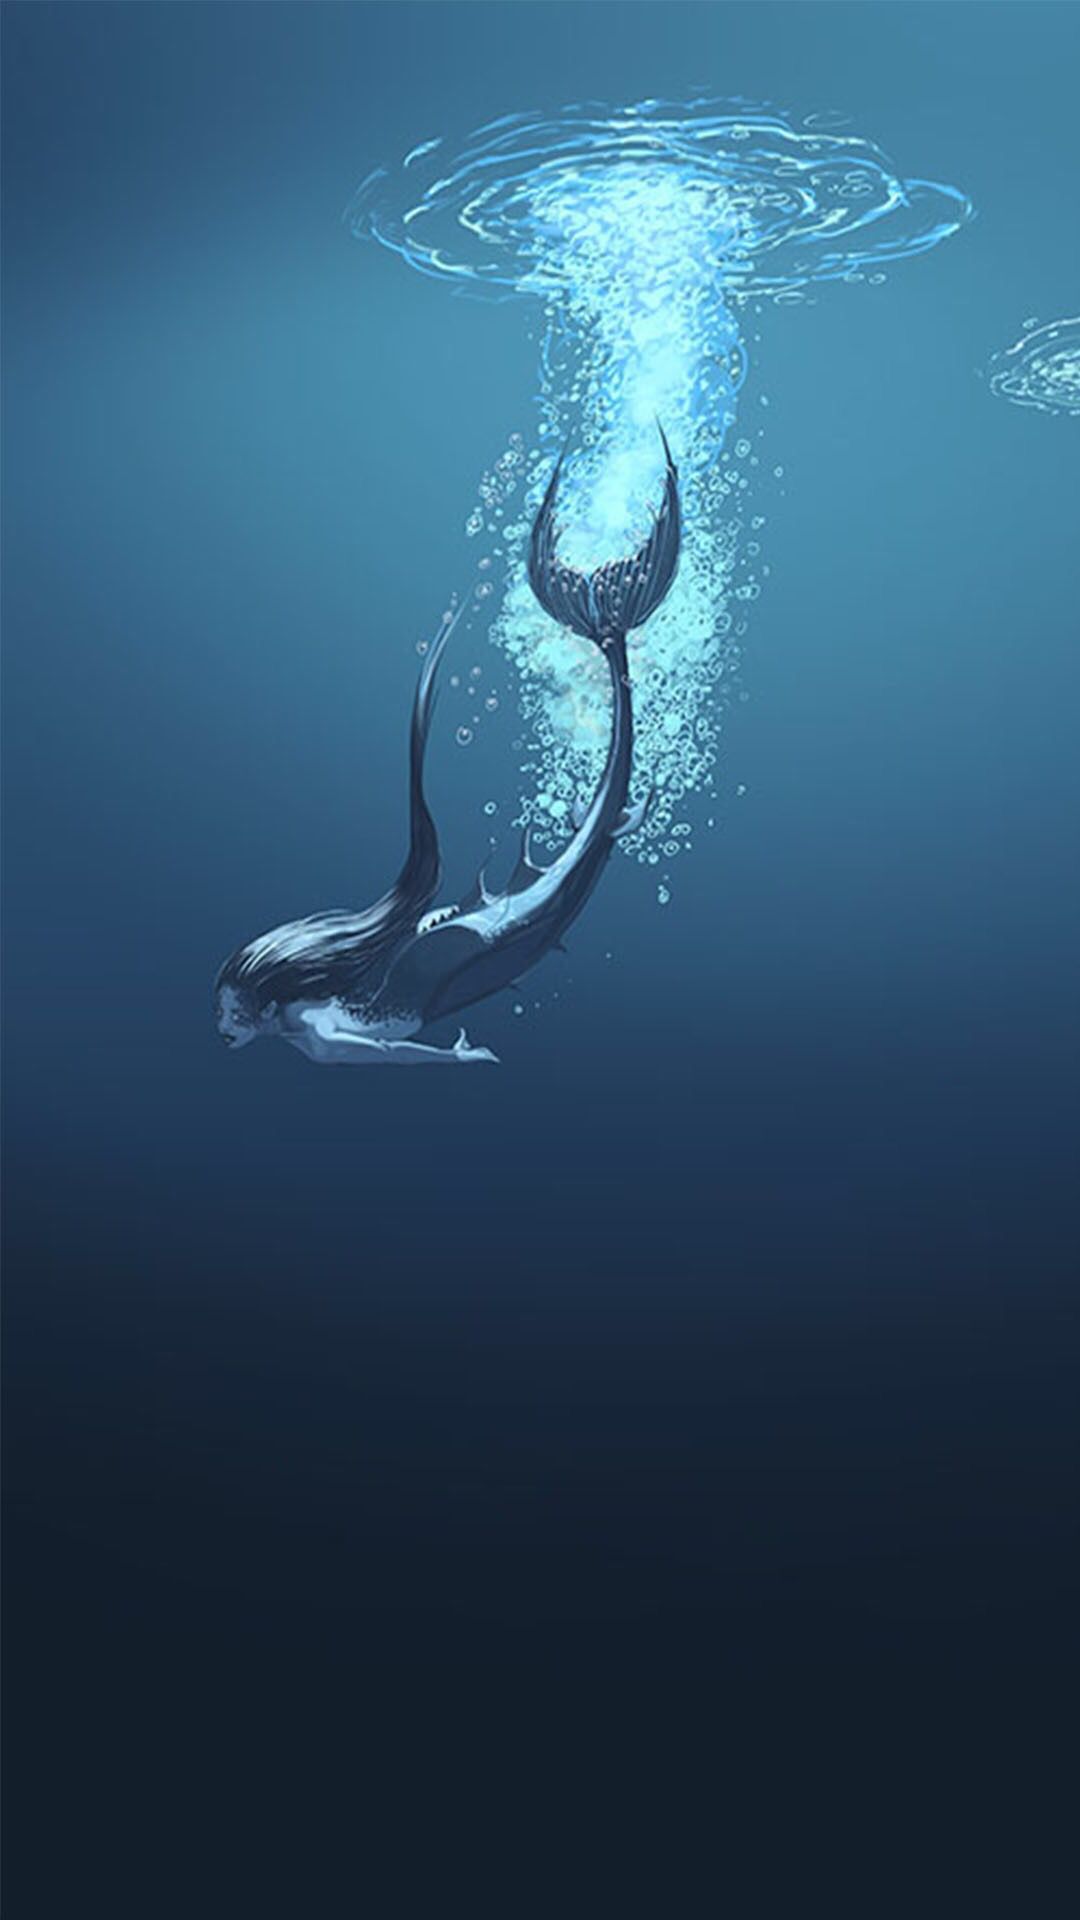 A whale is swimming in the ocean - Mermaid